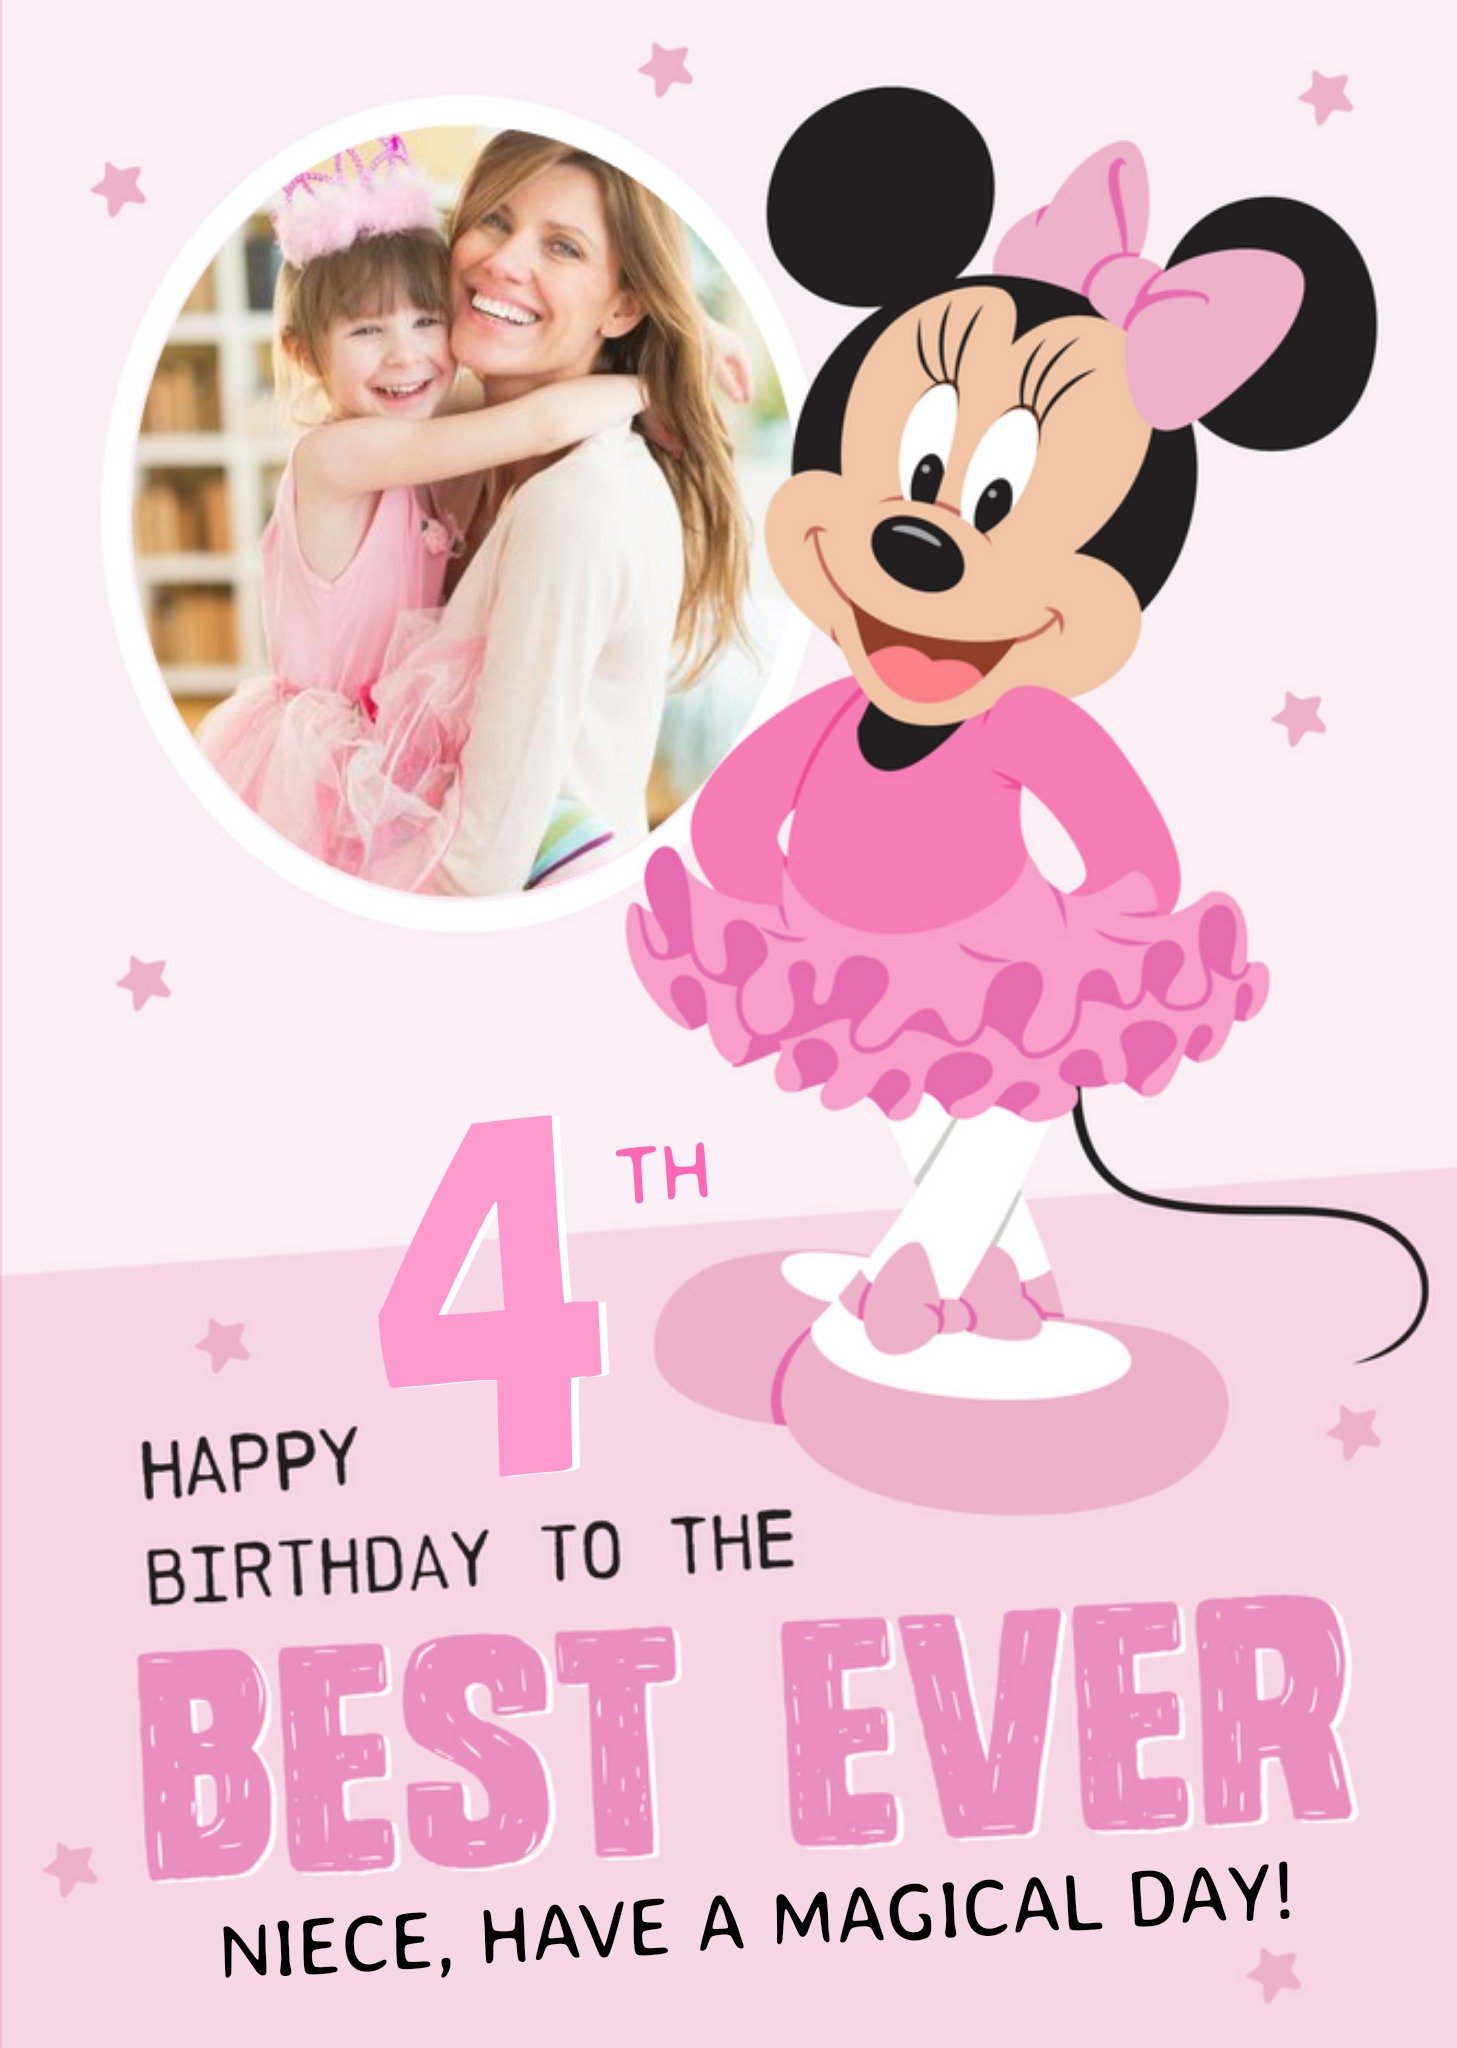 Disney Minnie Mouse Photo Upload 4th Birthday Card Best Ever Niece, Large